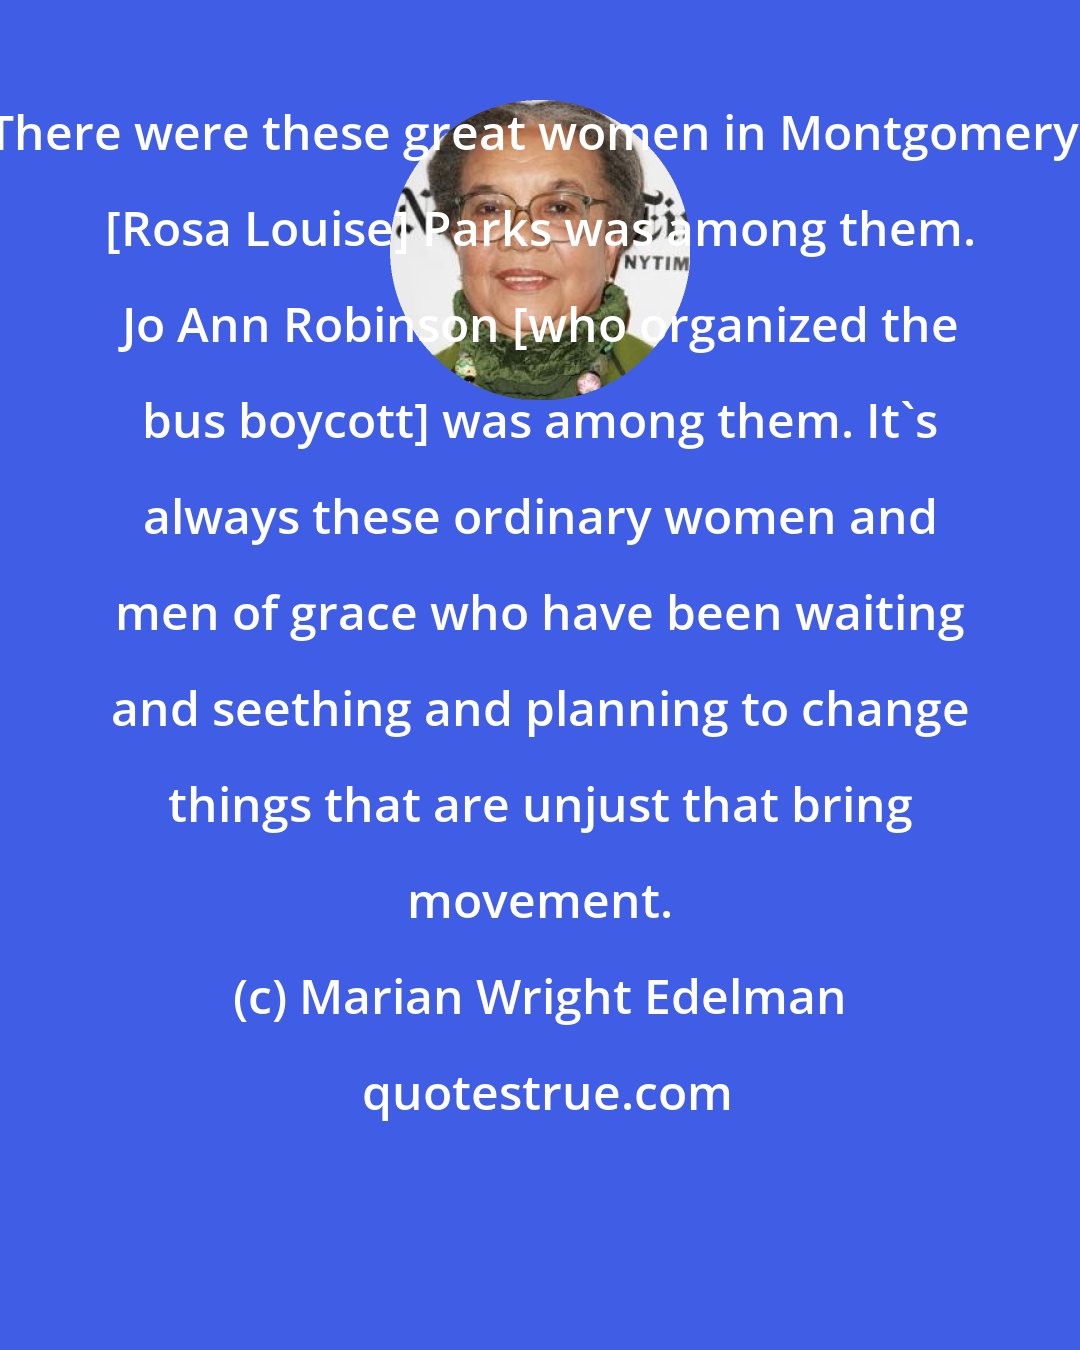 Marian Wright Edelman: There were these great women in Montgomery, [Rosa Louise] Parks was among them. Jo Ann Robinson [who organized the bus boycott] was among them. It's always these ordinary women and men of grace who have been waiting and seething and planning to change things that are unjust that bring movement.